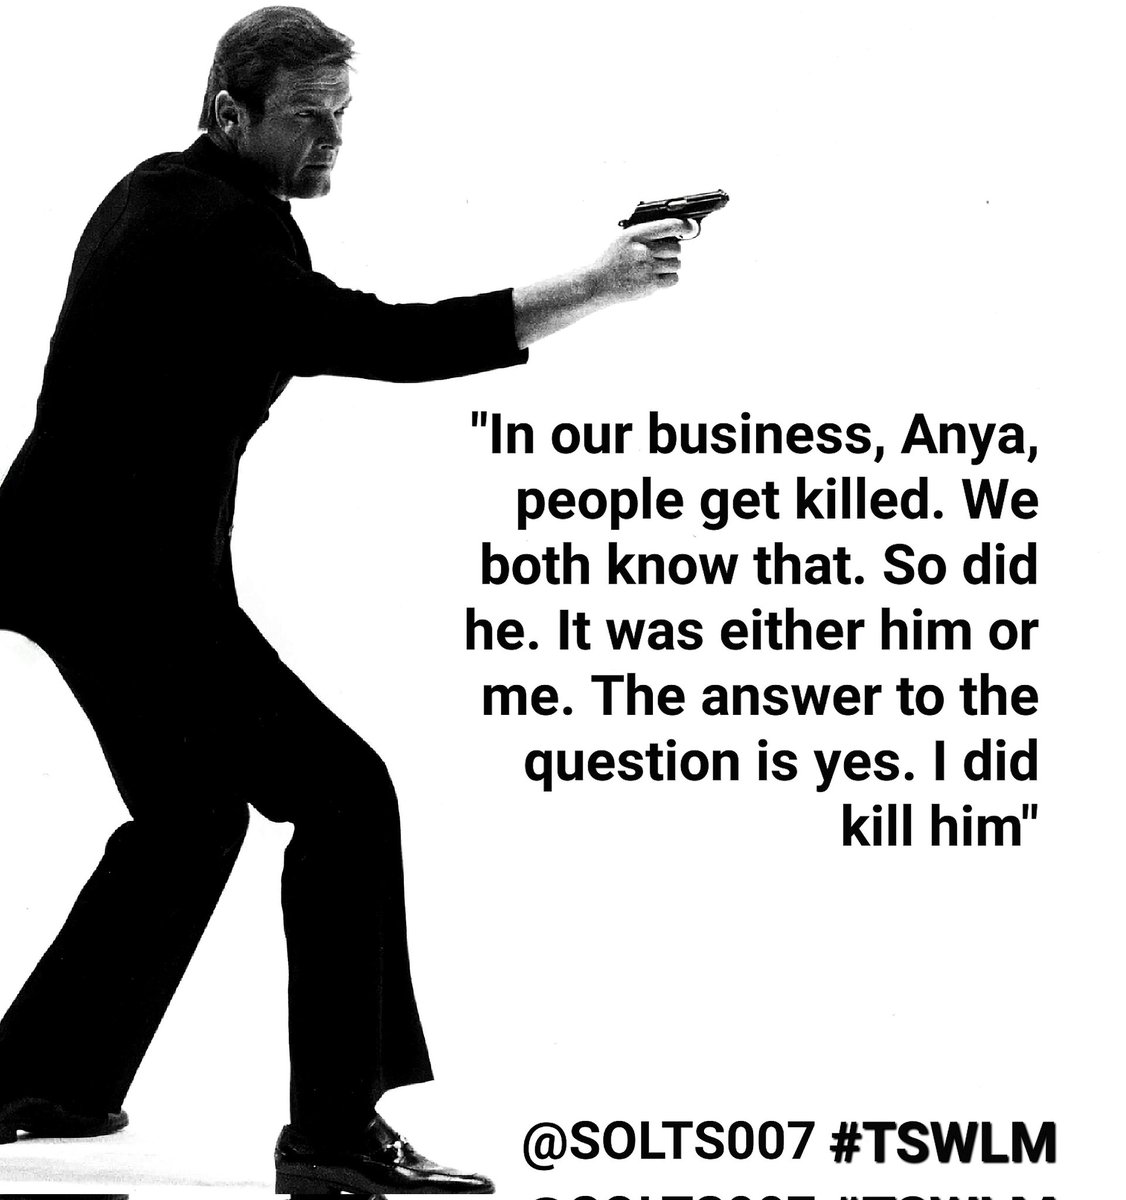 007 Killer quote
#JamesBond
#RogerMoore  #TSWLM #TheSpyWhoLovedMe (1977)